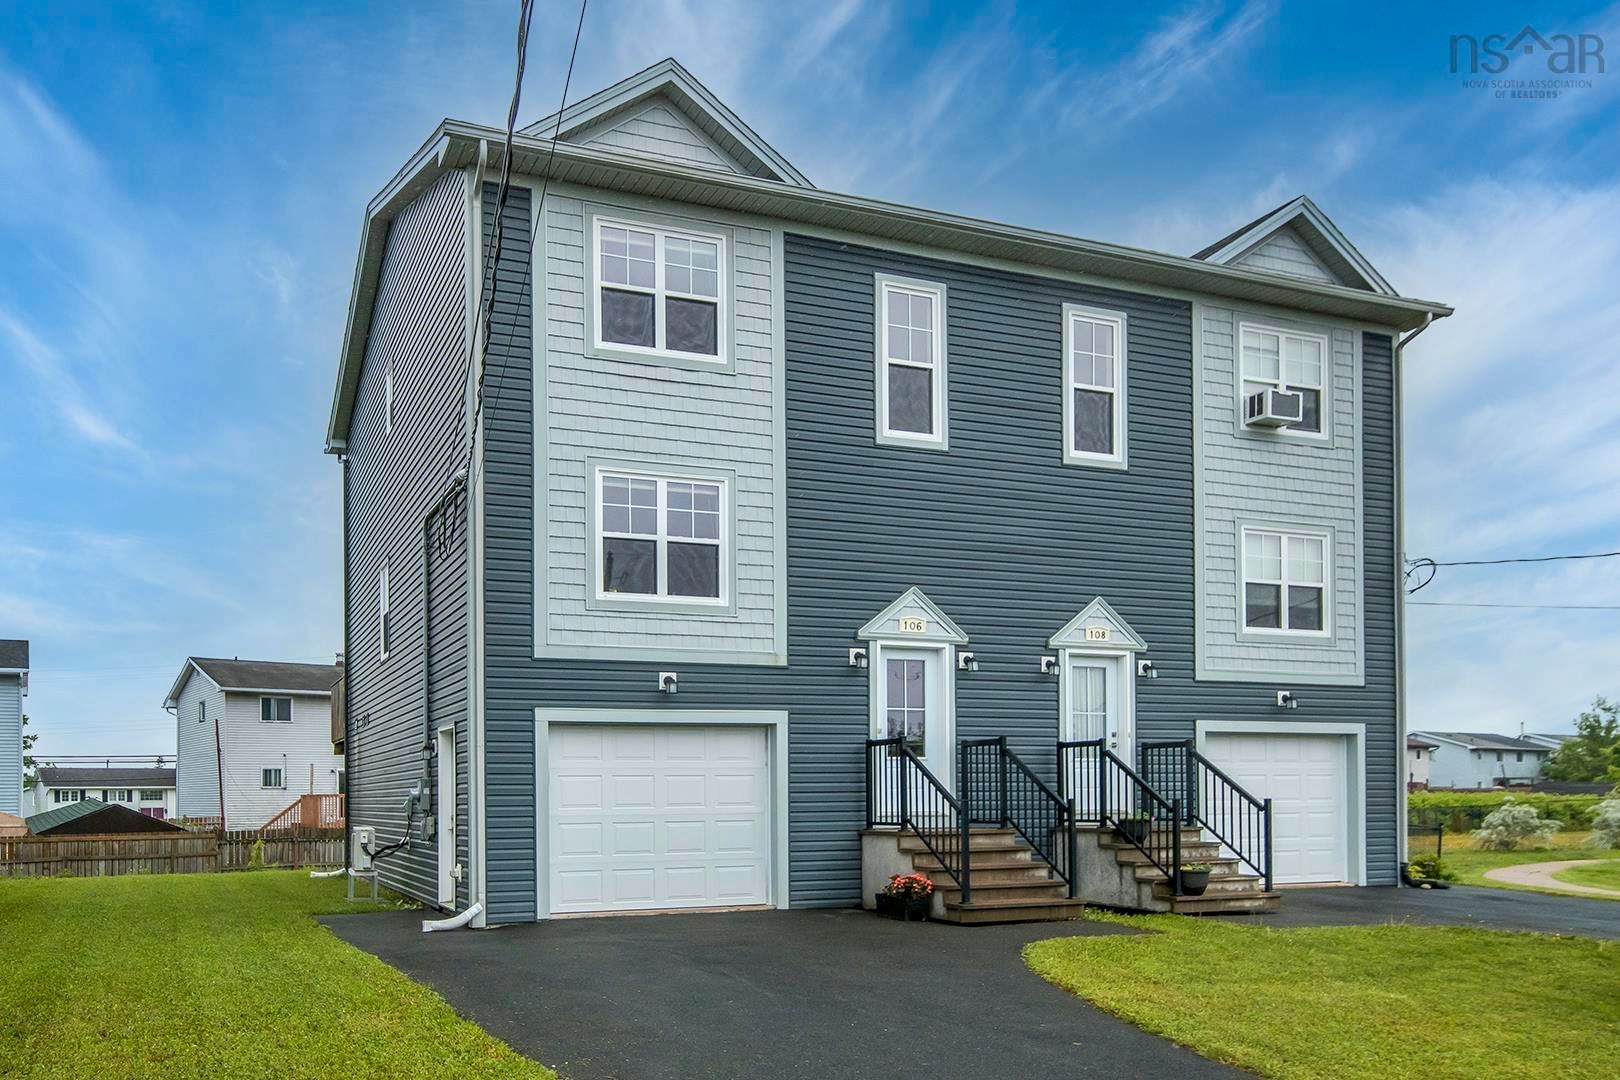 Main Photo: 106 Kaleigh Drive in Eastern Passage: 11-Dartmouth Woodside, Eastern P Residential for sale (Halifax-Dartmouth)  : MLS®# 202214189